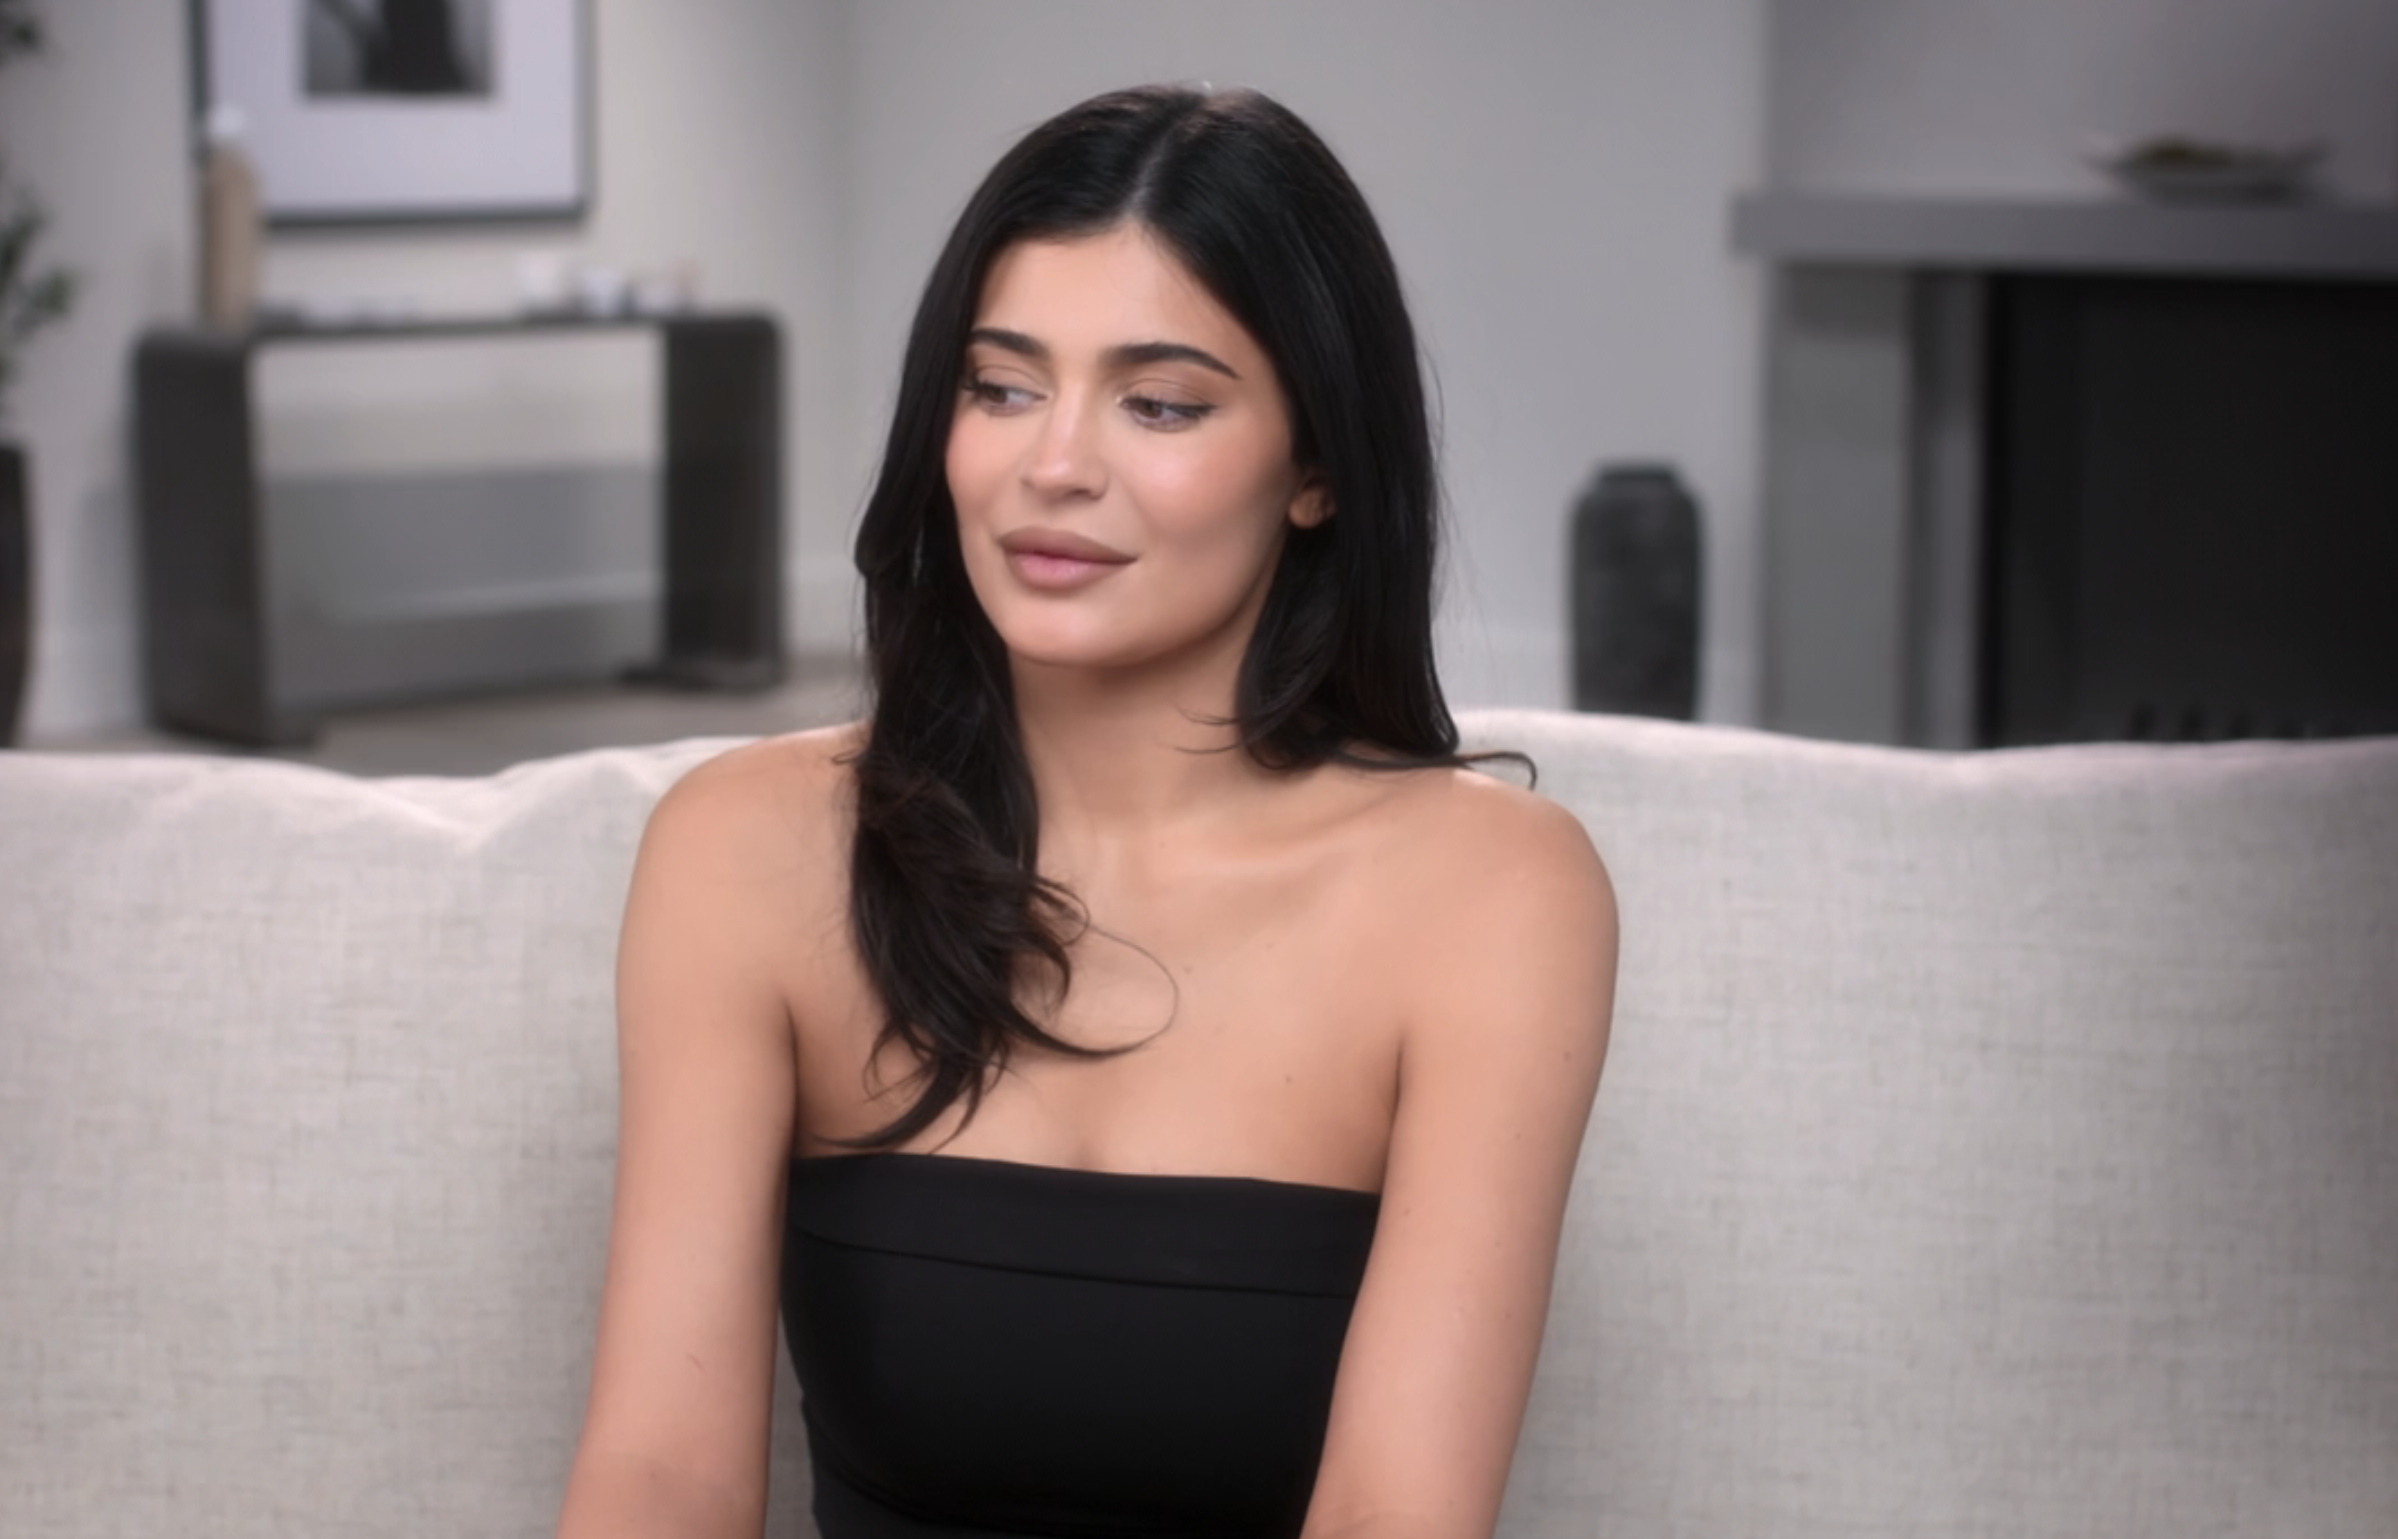 Close-up of Kylie sitting and wearing a strapless top